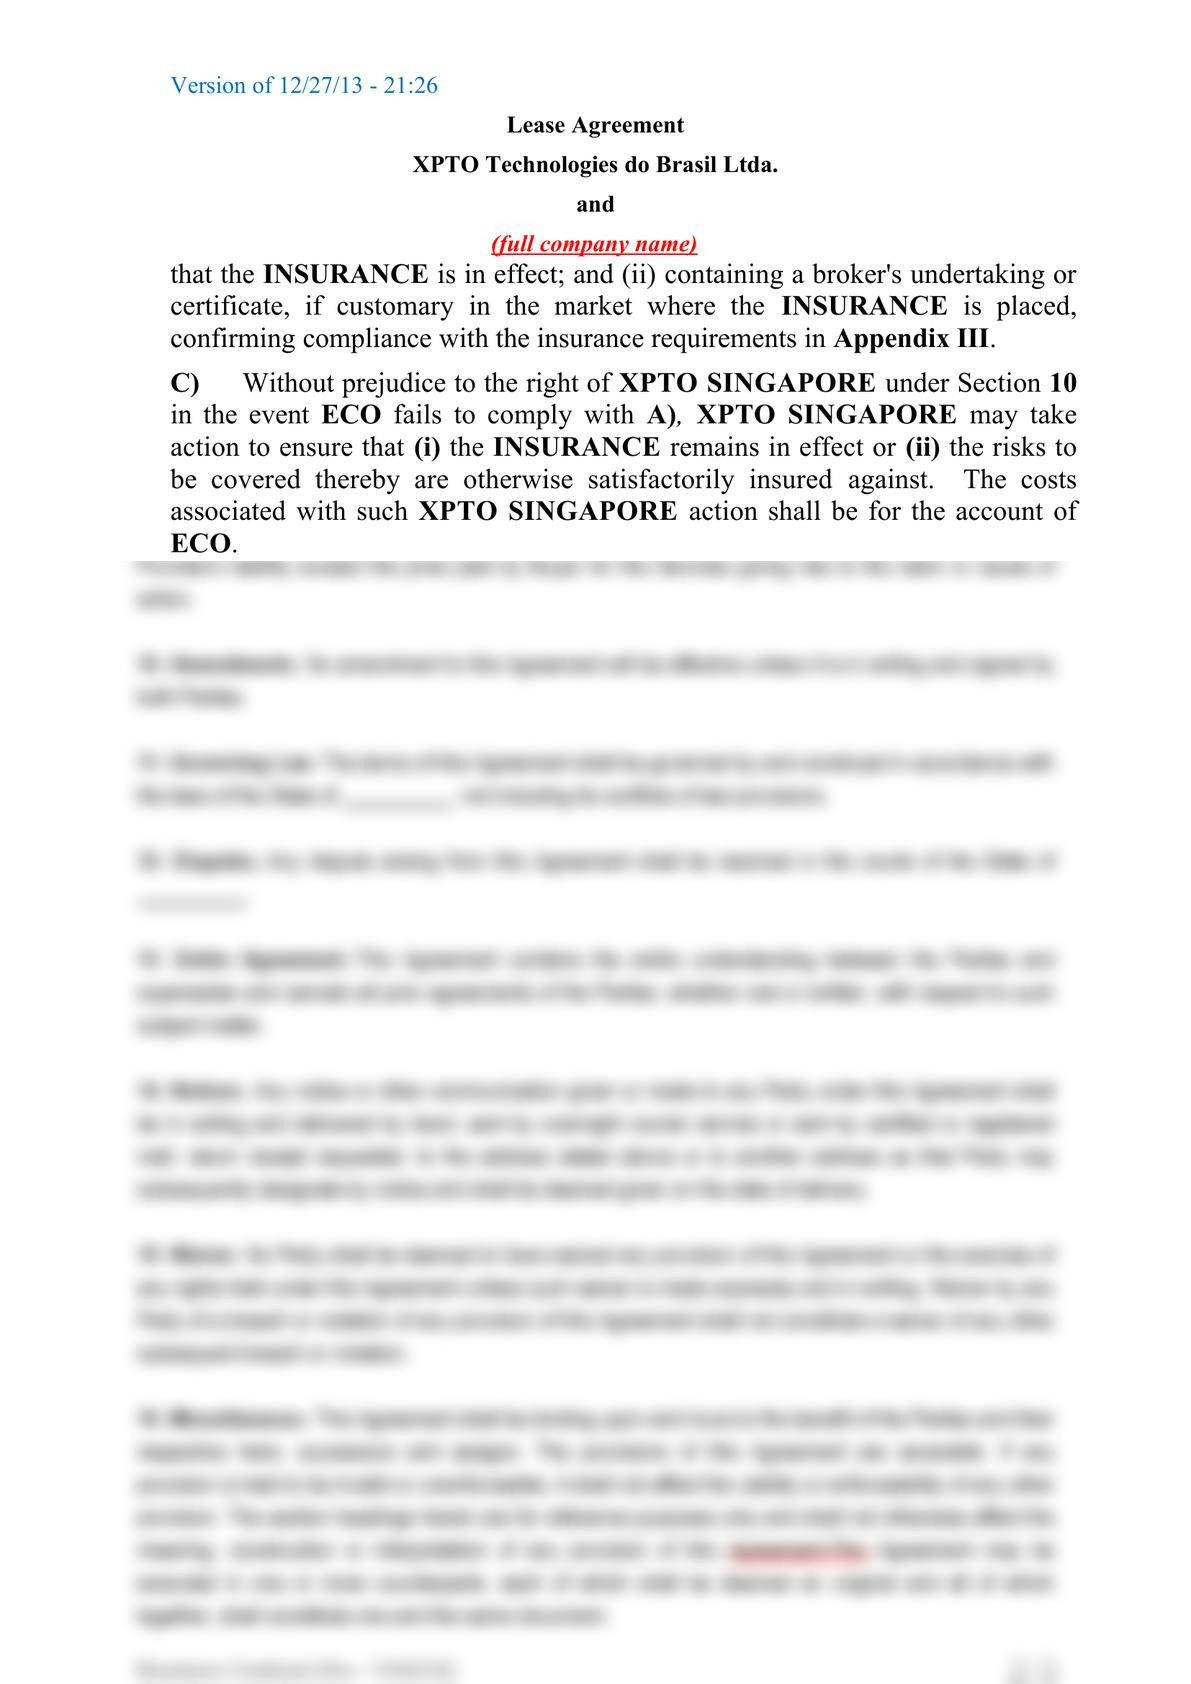 Subsea equipment lease agreement-4